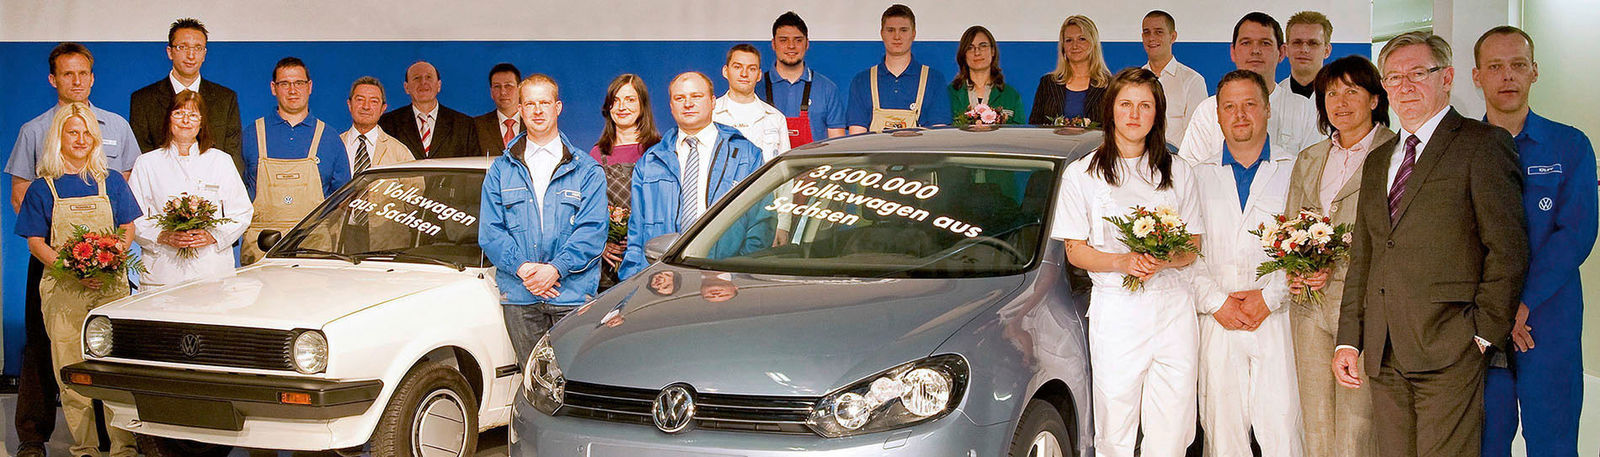 Story "30 Facts about Volkswagen in East Germany"